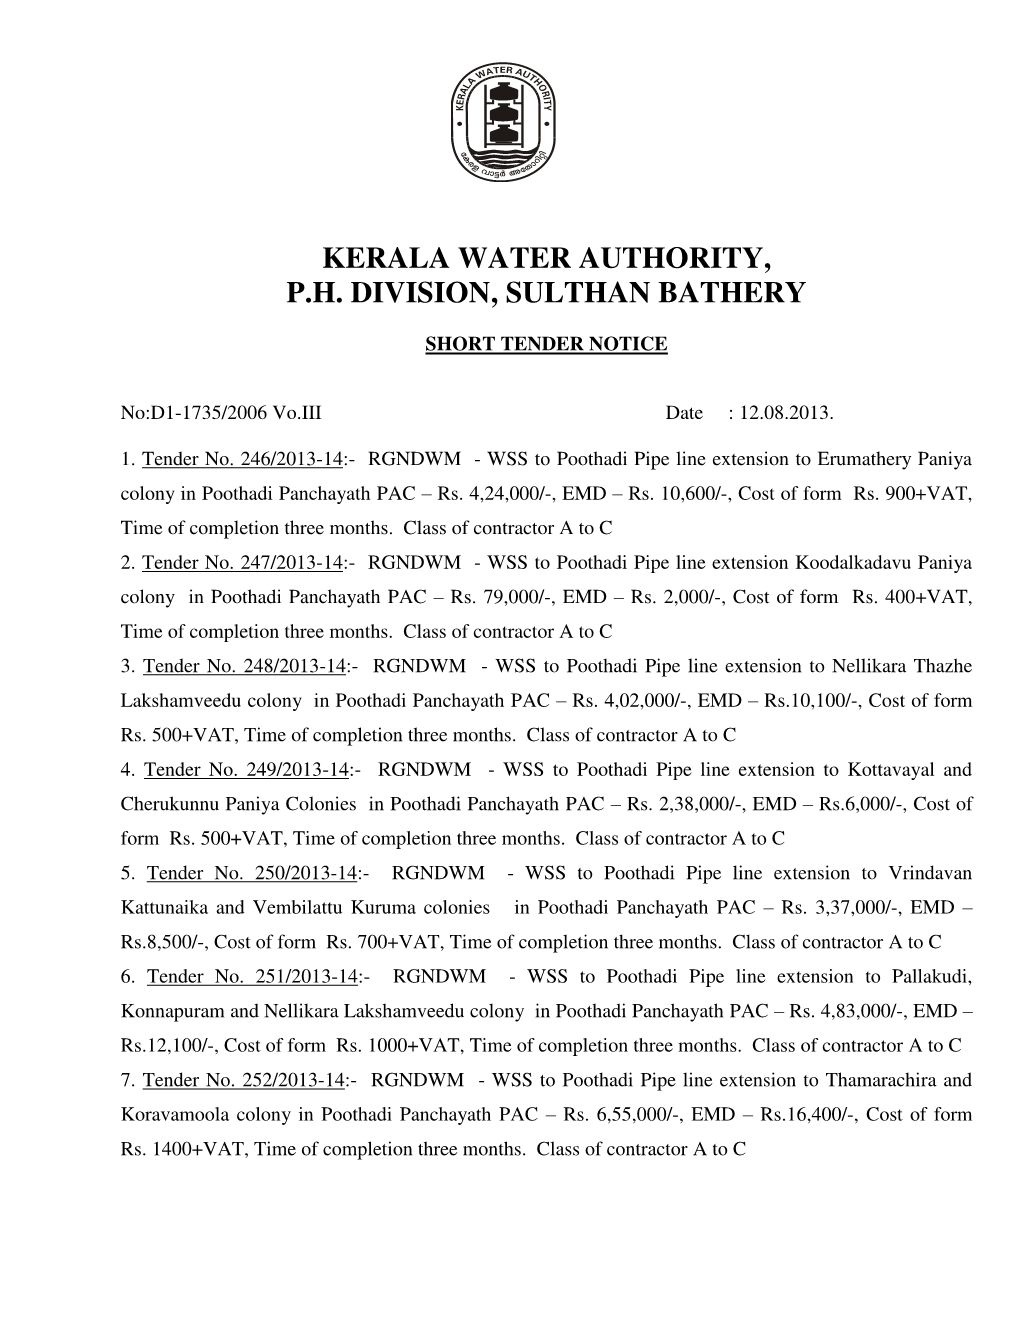 Kerala Water Authority, P.H. Division, Sulthan Bathery